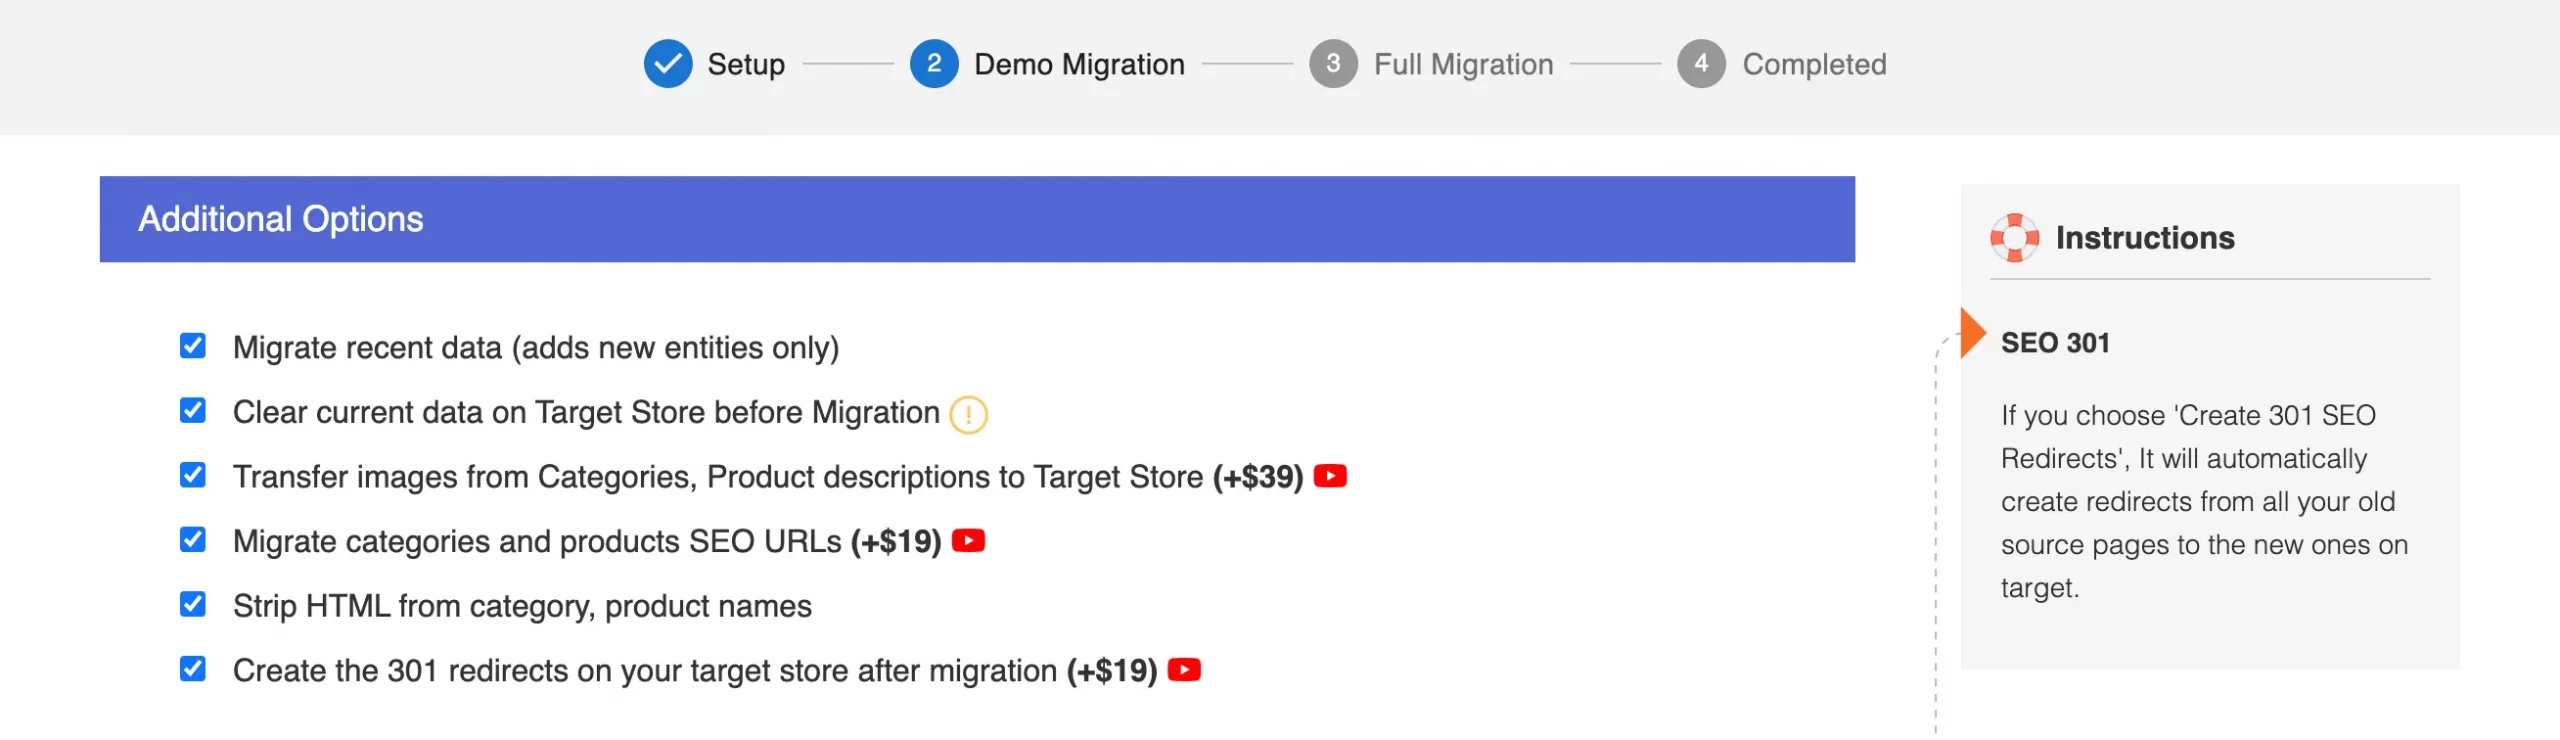 Select Additional Options for your migration to BigCommerce